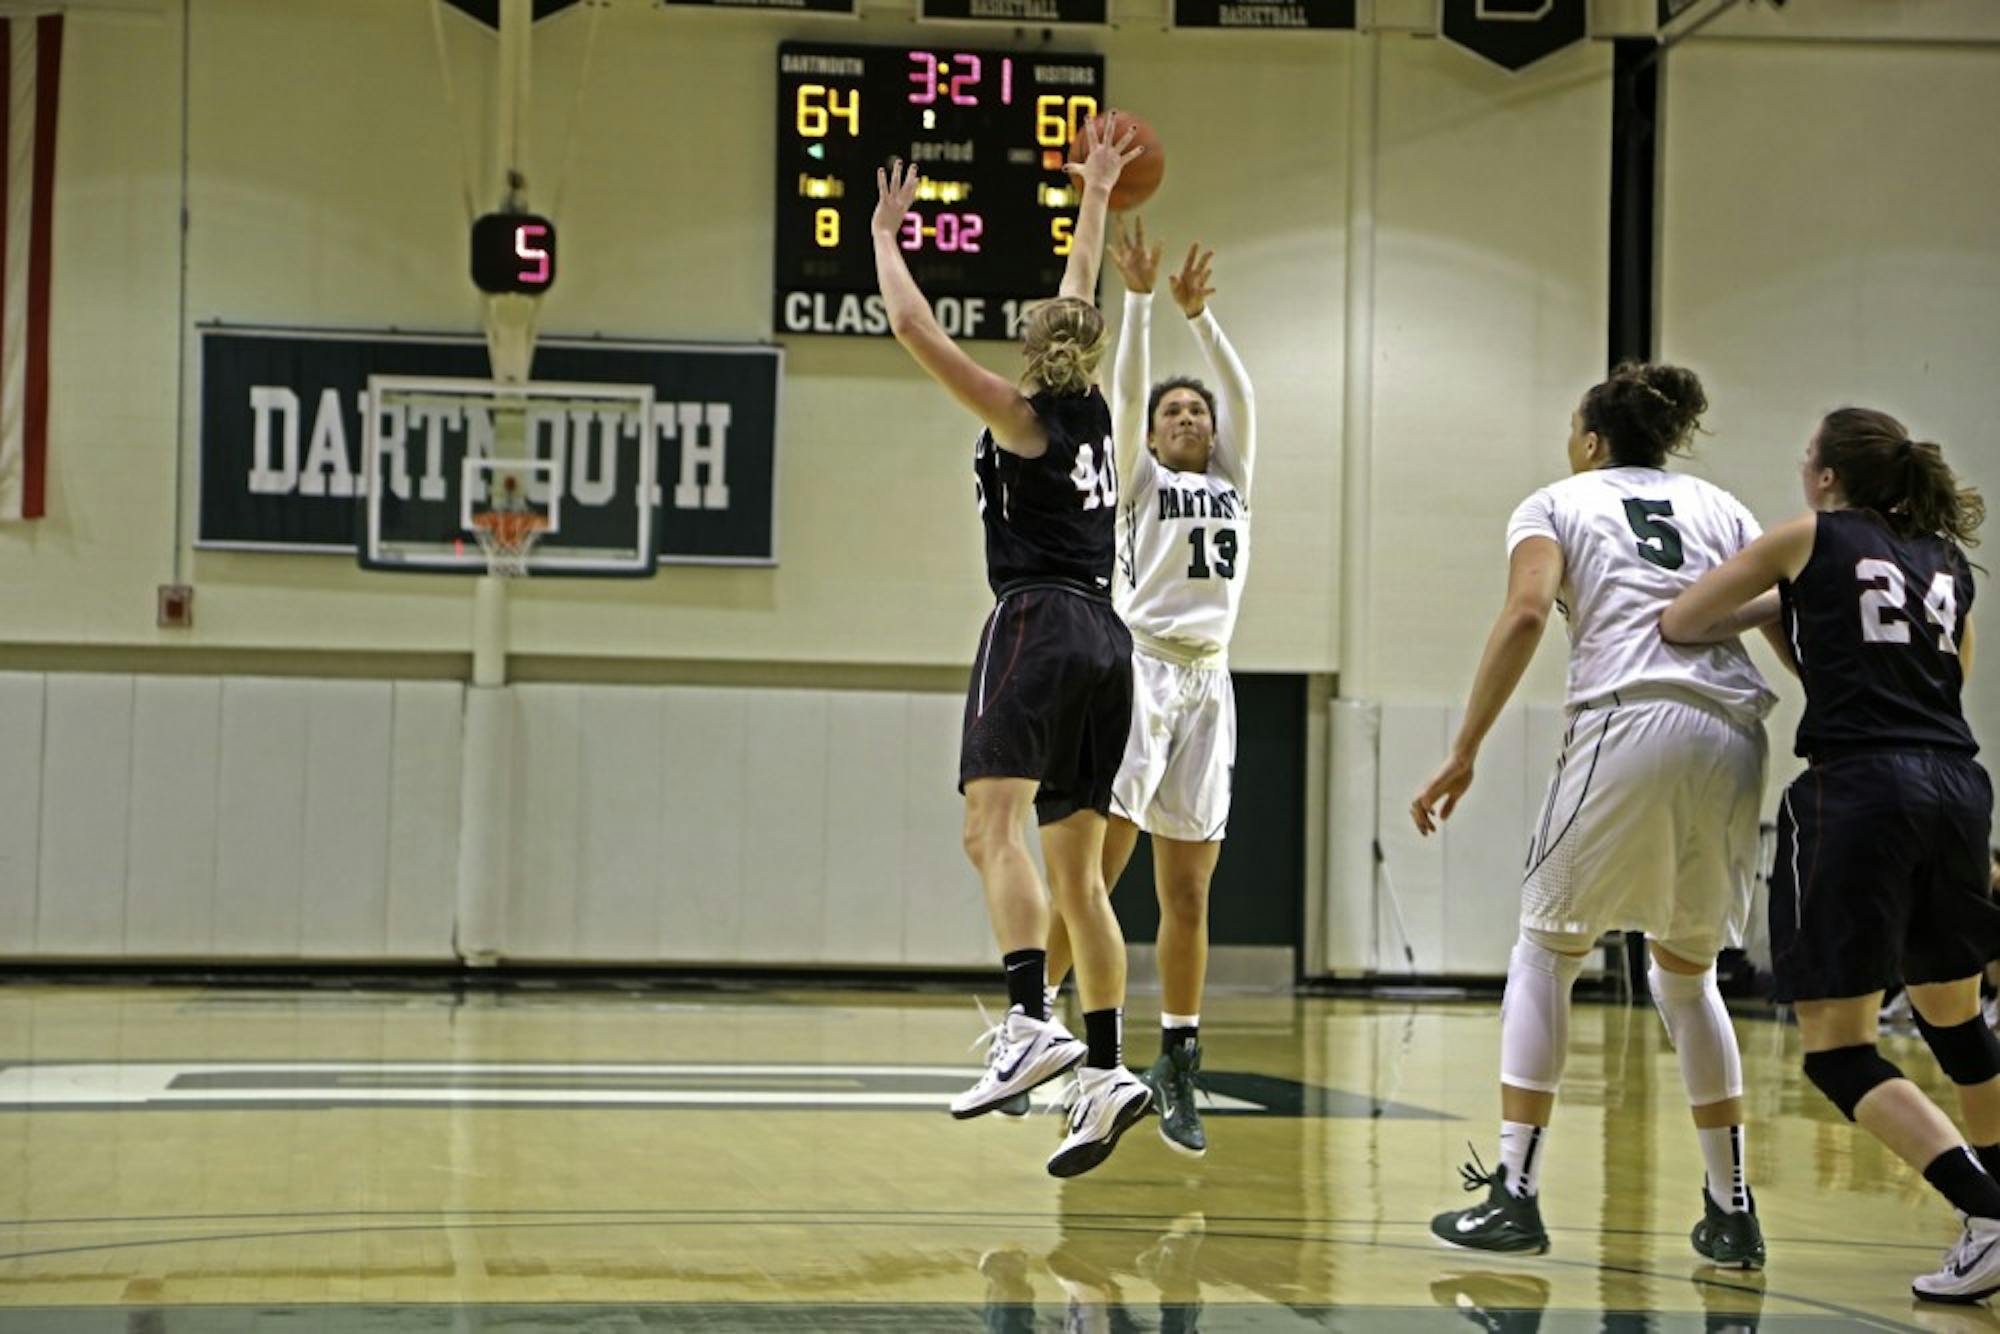 Lakin Roland ’16 goes up for a contested shot during Saturday’s last minute loss to Harvard University.